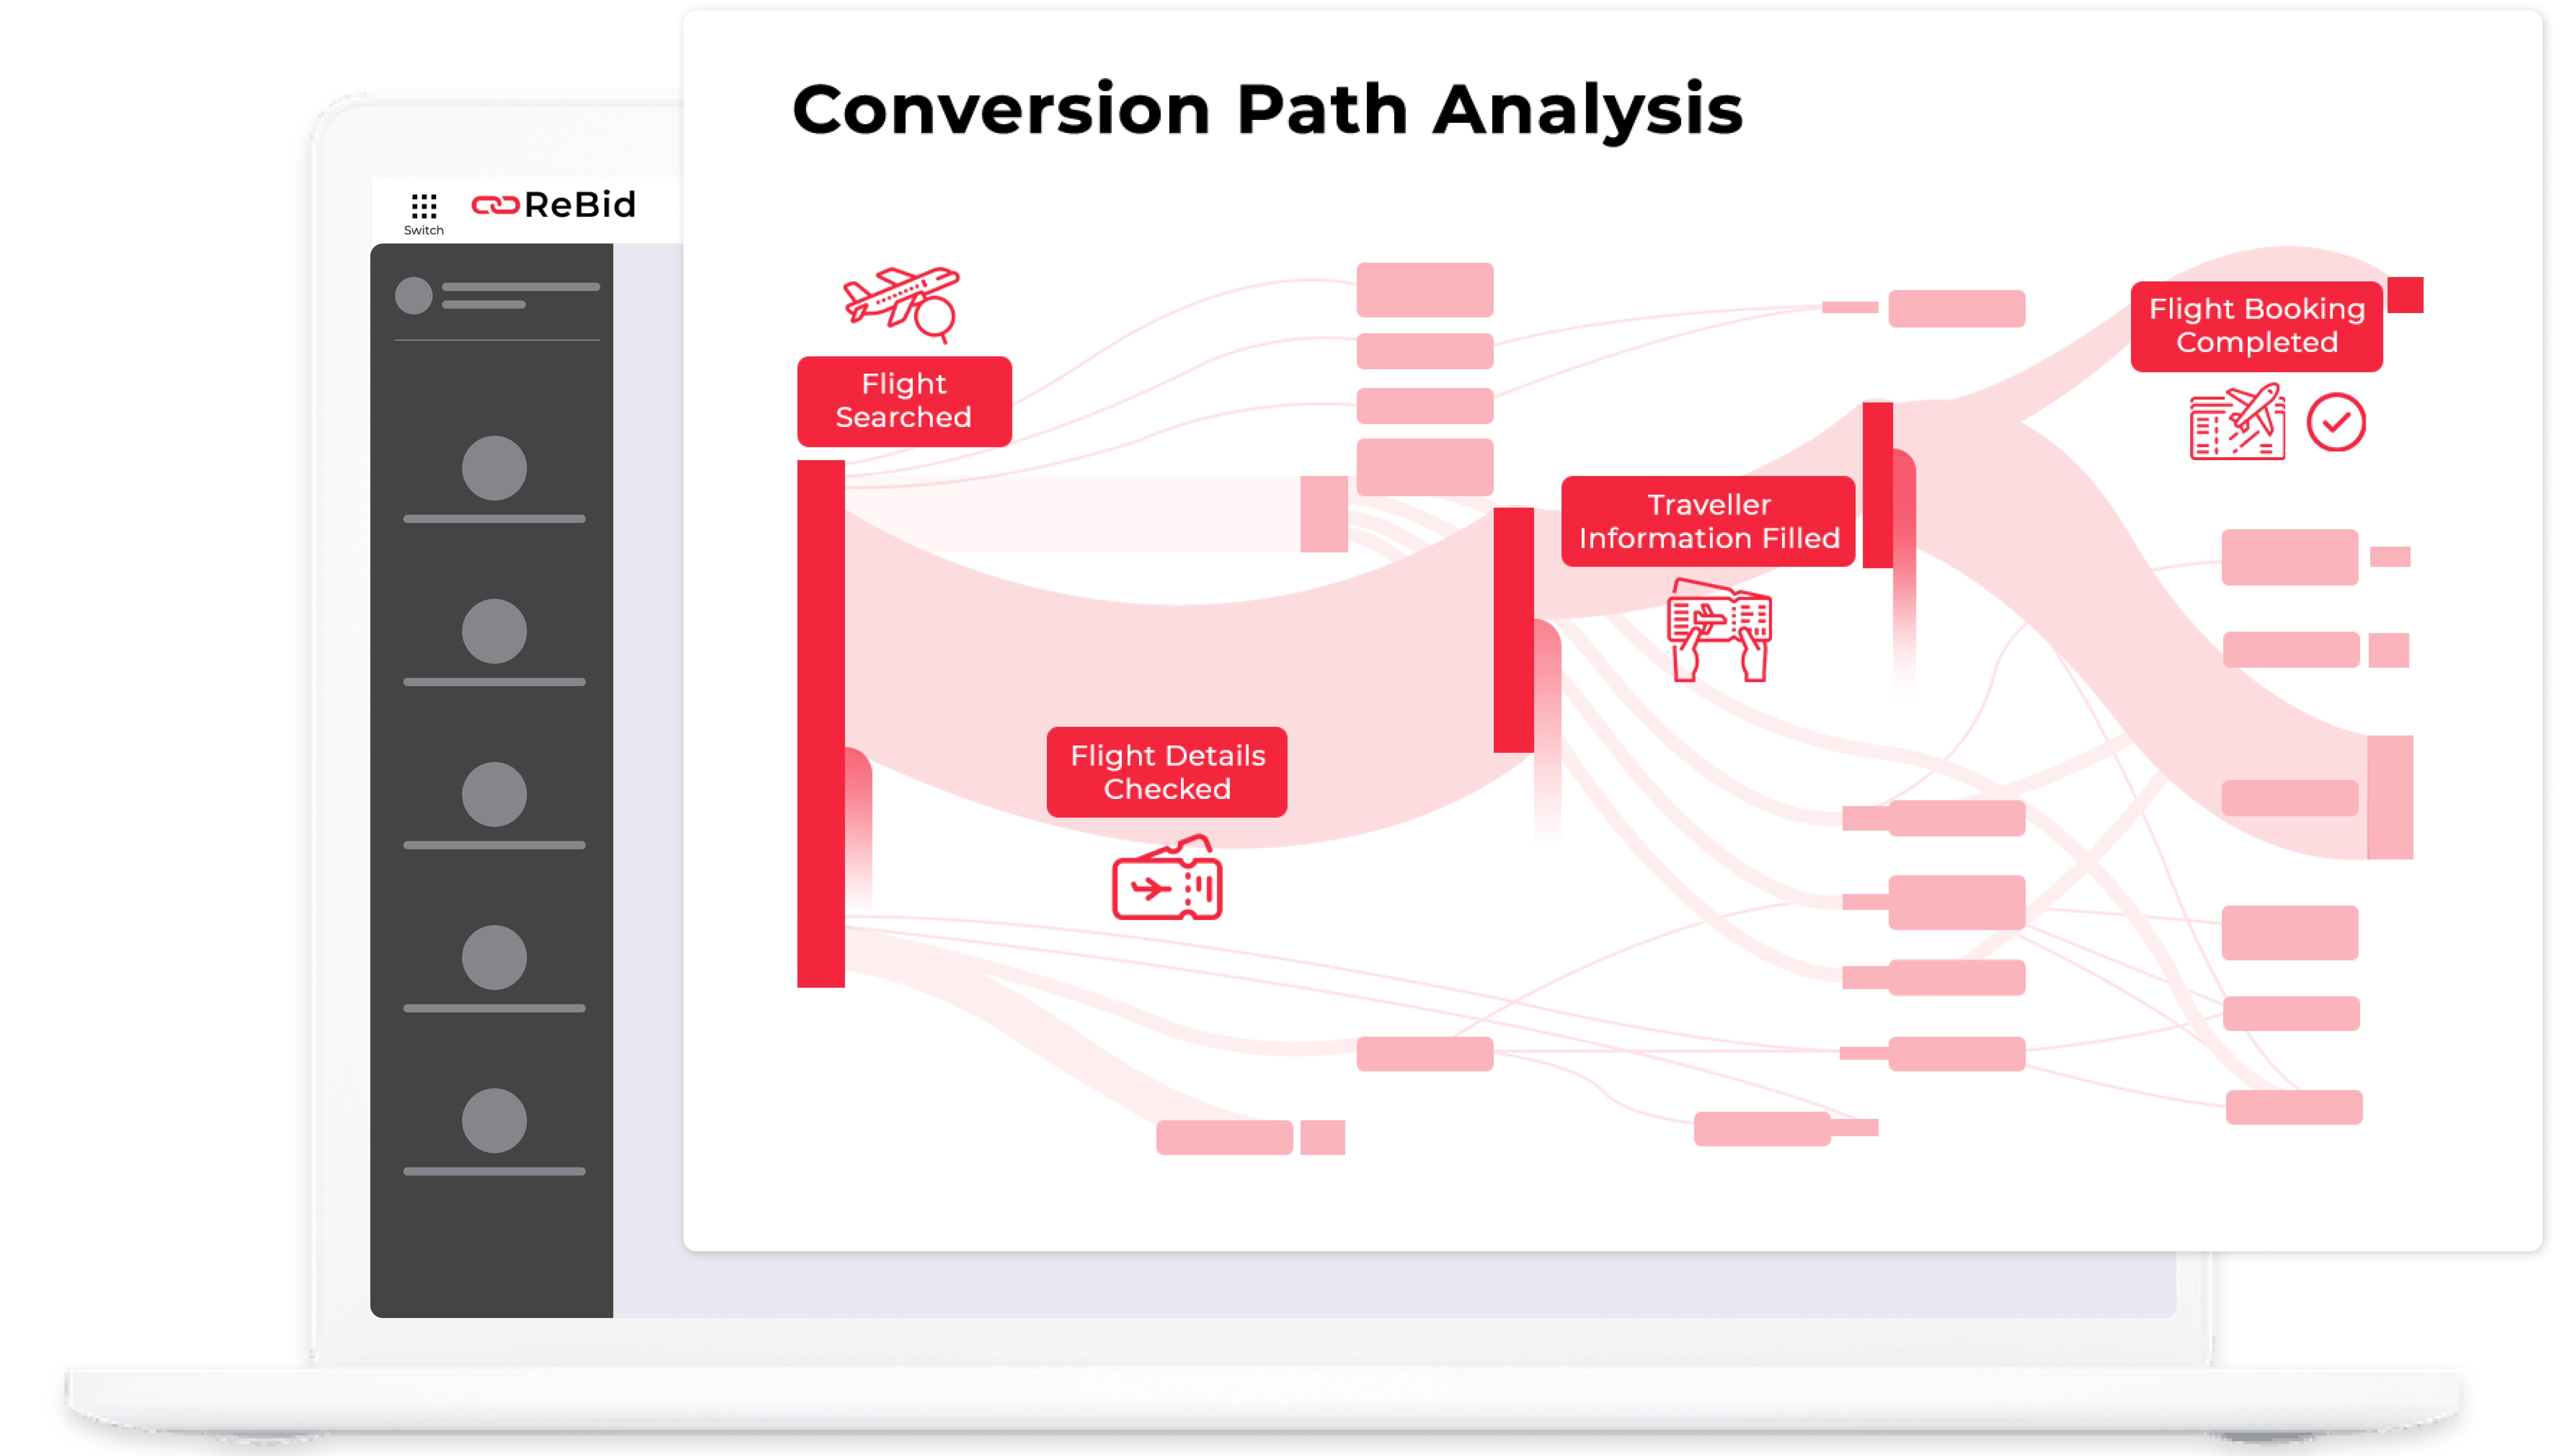 Solutions for Travel & Hospitality sector - Travel Conversion Path Analysis - Rebid.co